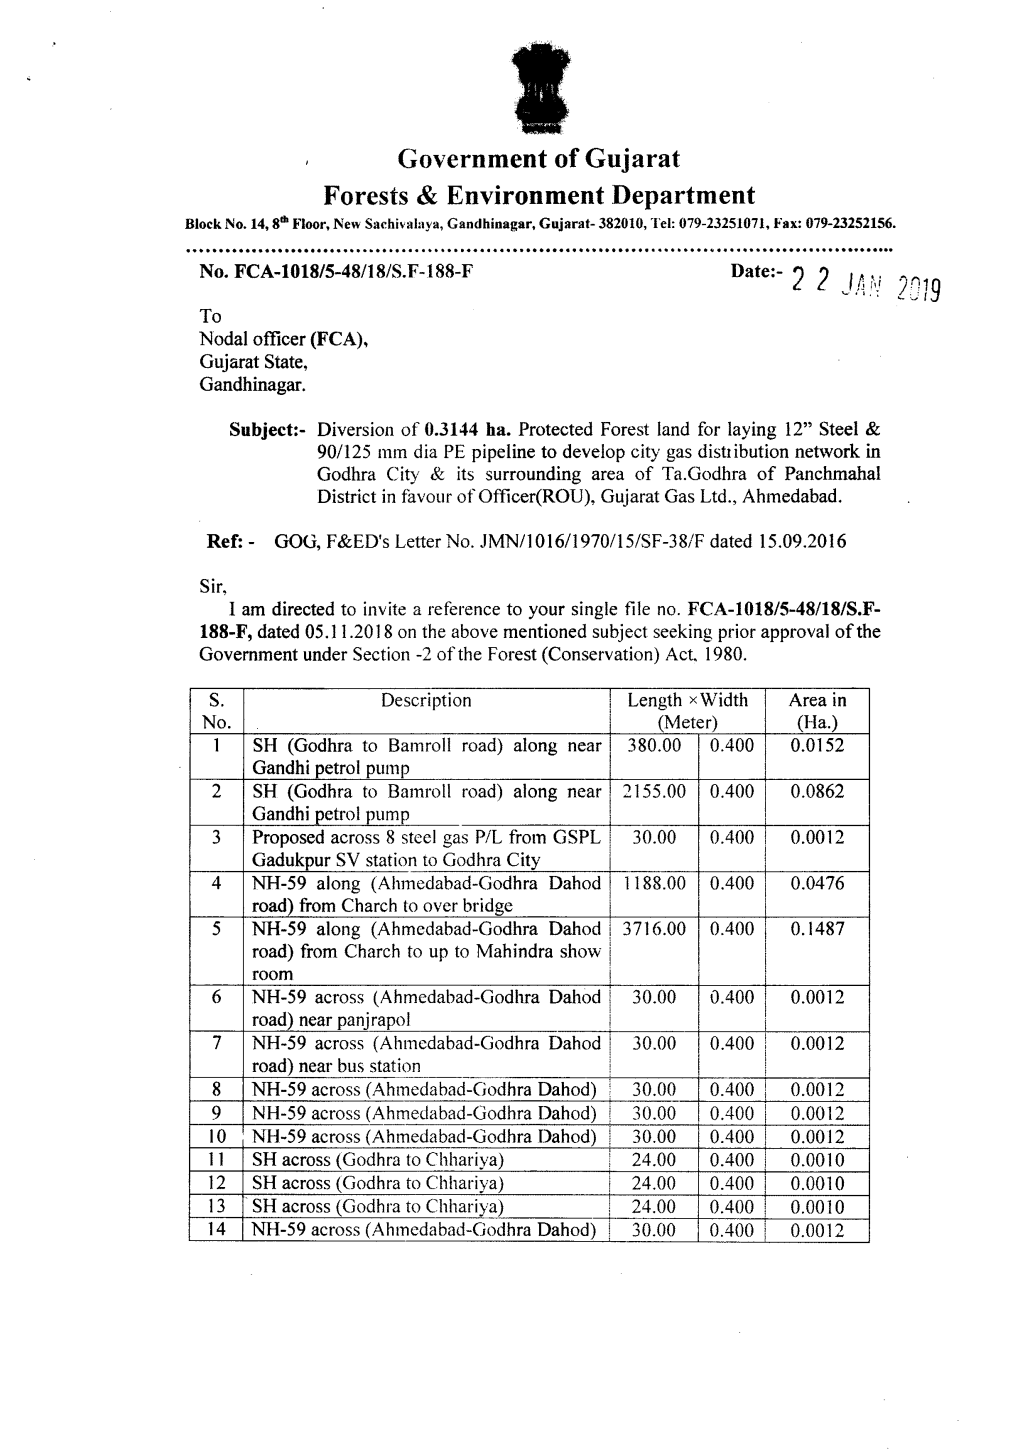 Government of Gujarat Forests & Environment Department I